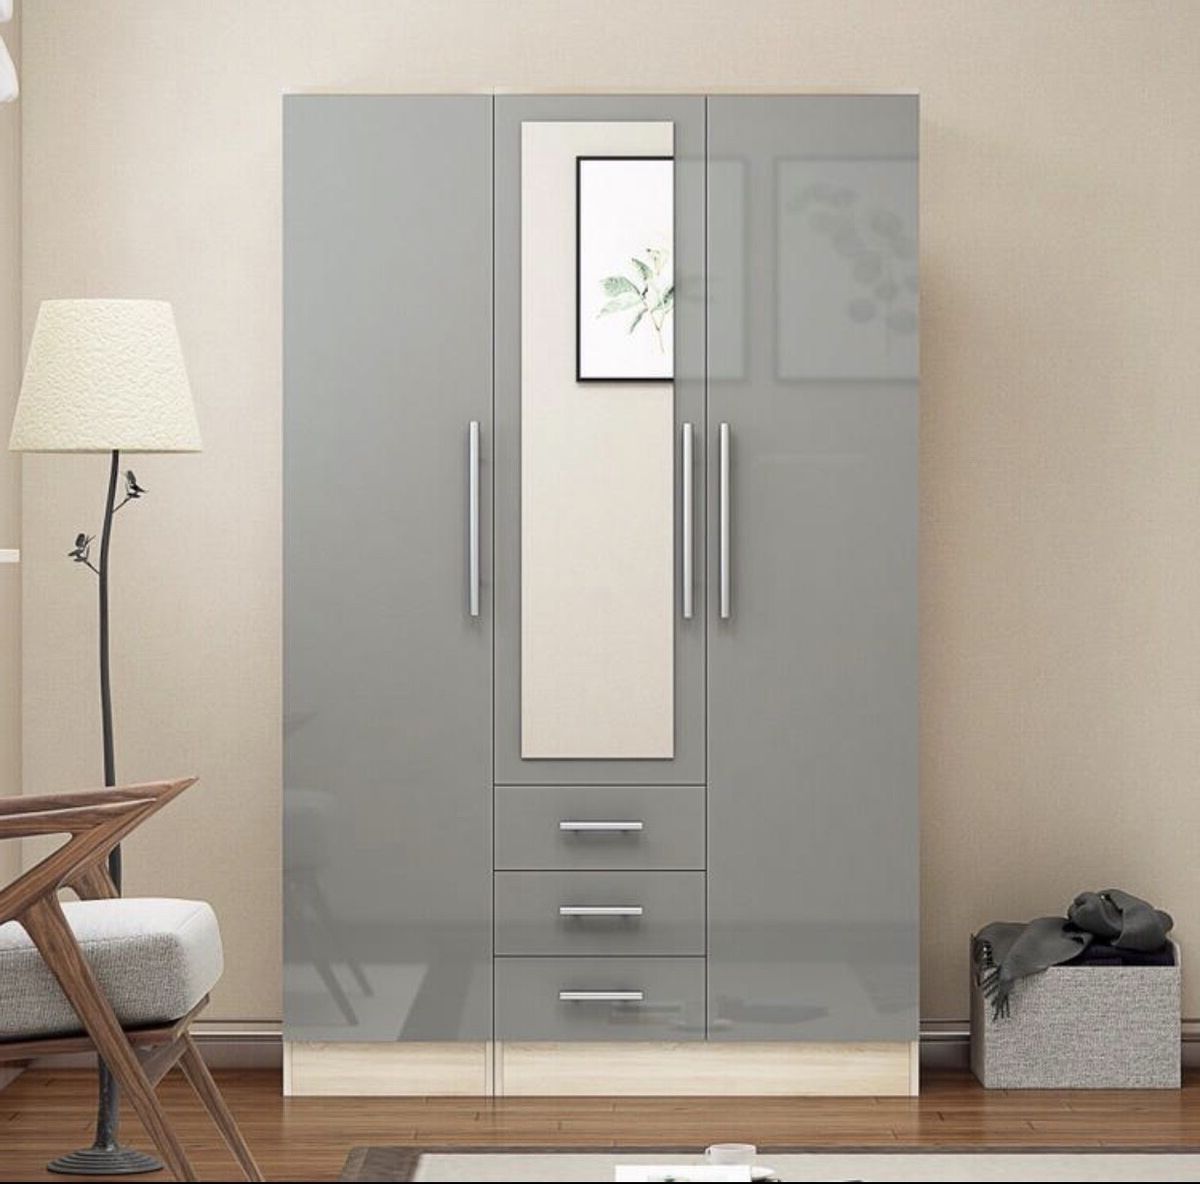 Unique 3 Door Combi Mirrored Wardrobe, 3 Drawers, In High Gloss  Grey/black/white | Ebay In Combi Wardrobes (View 6 of 20)